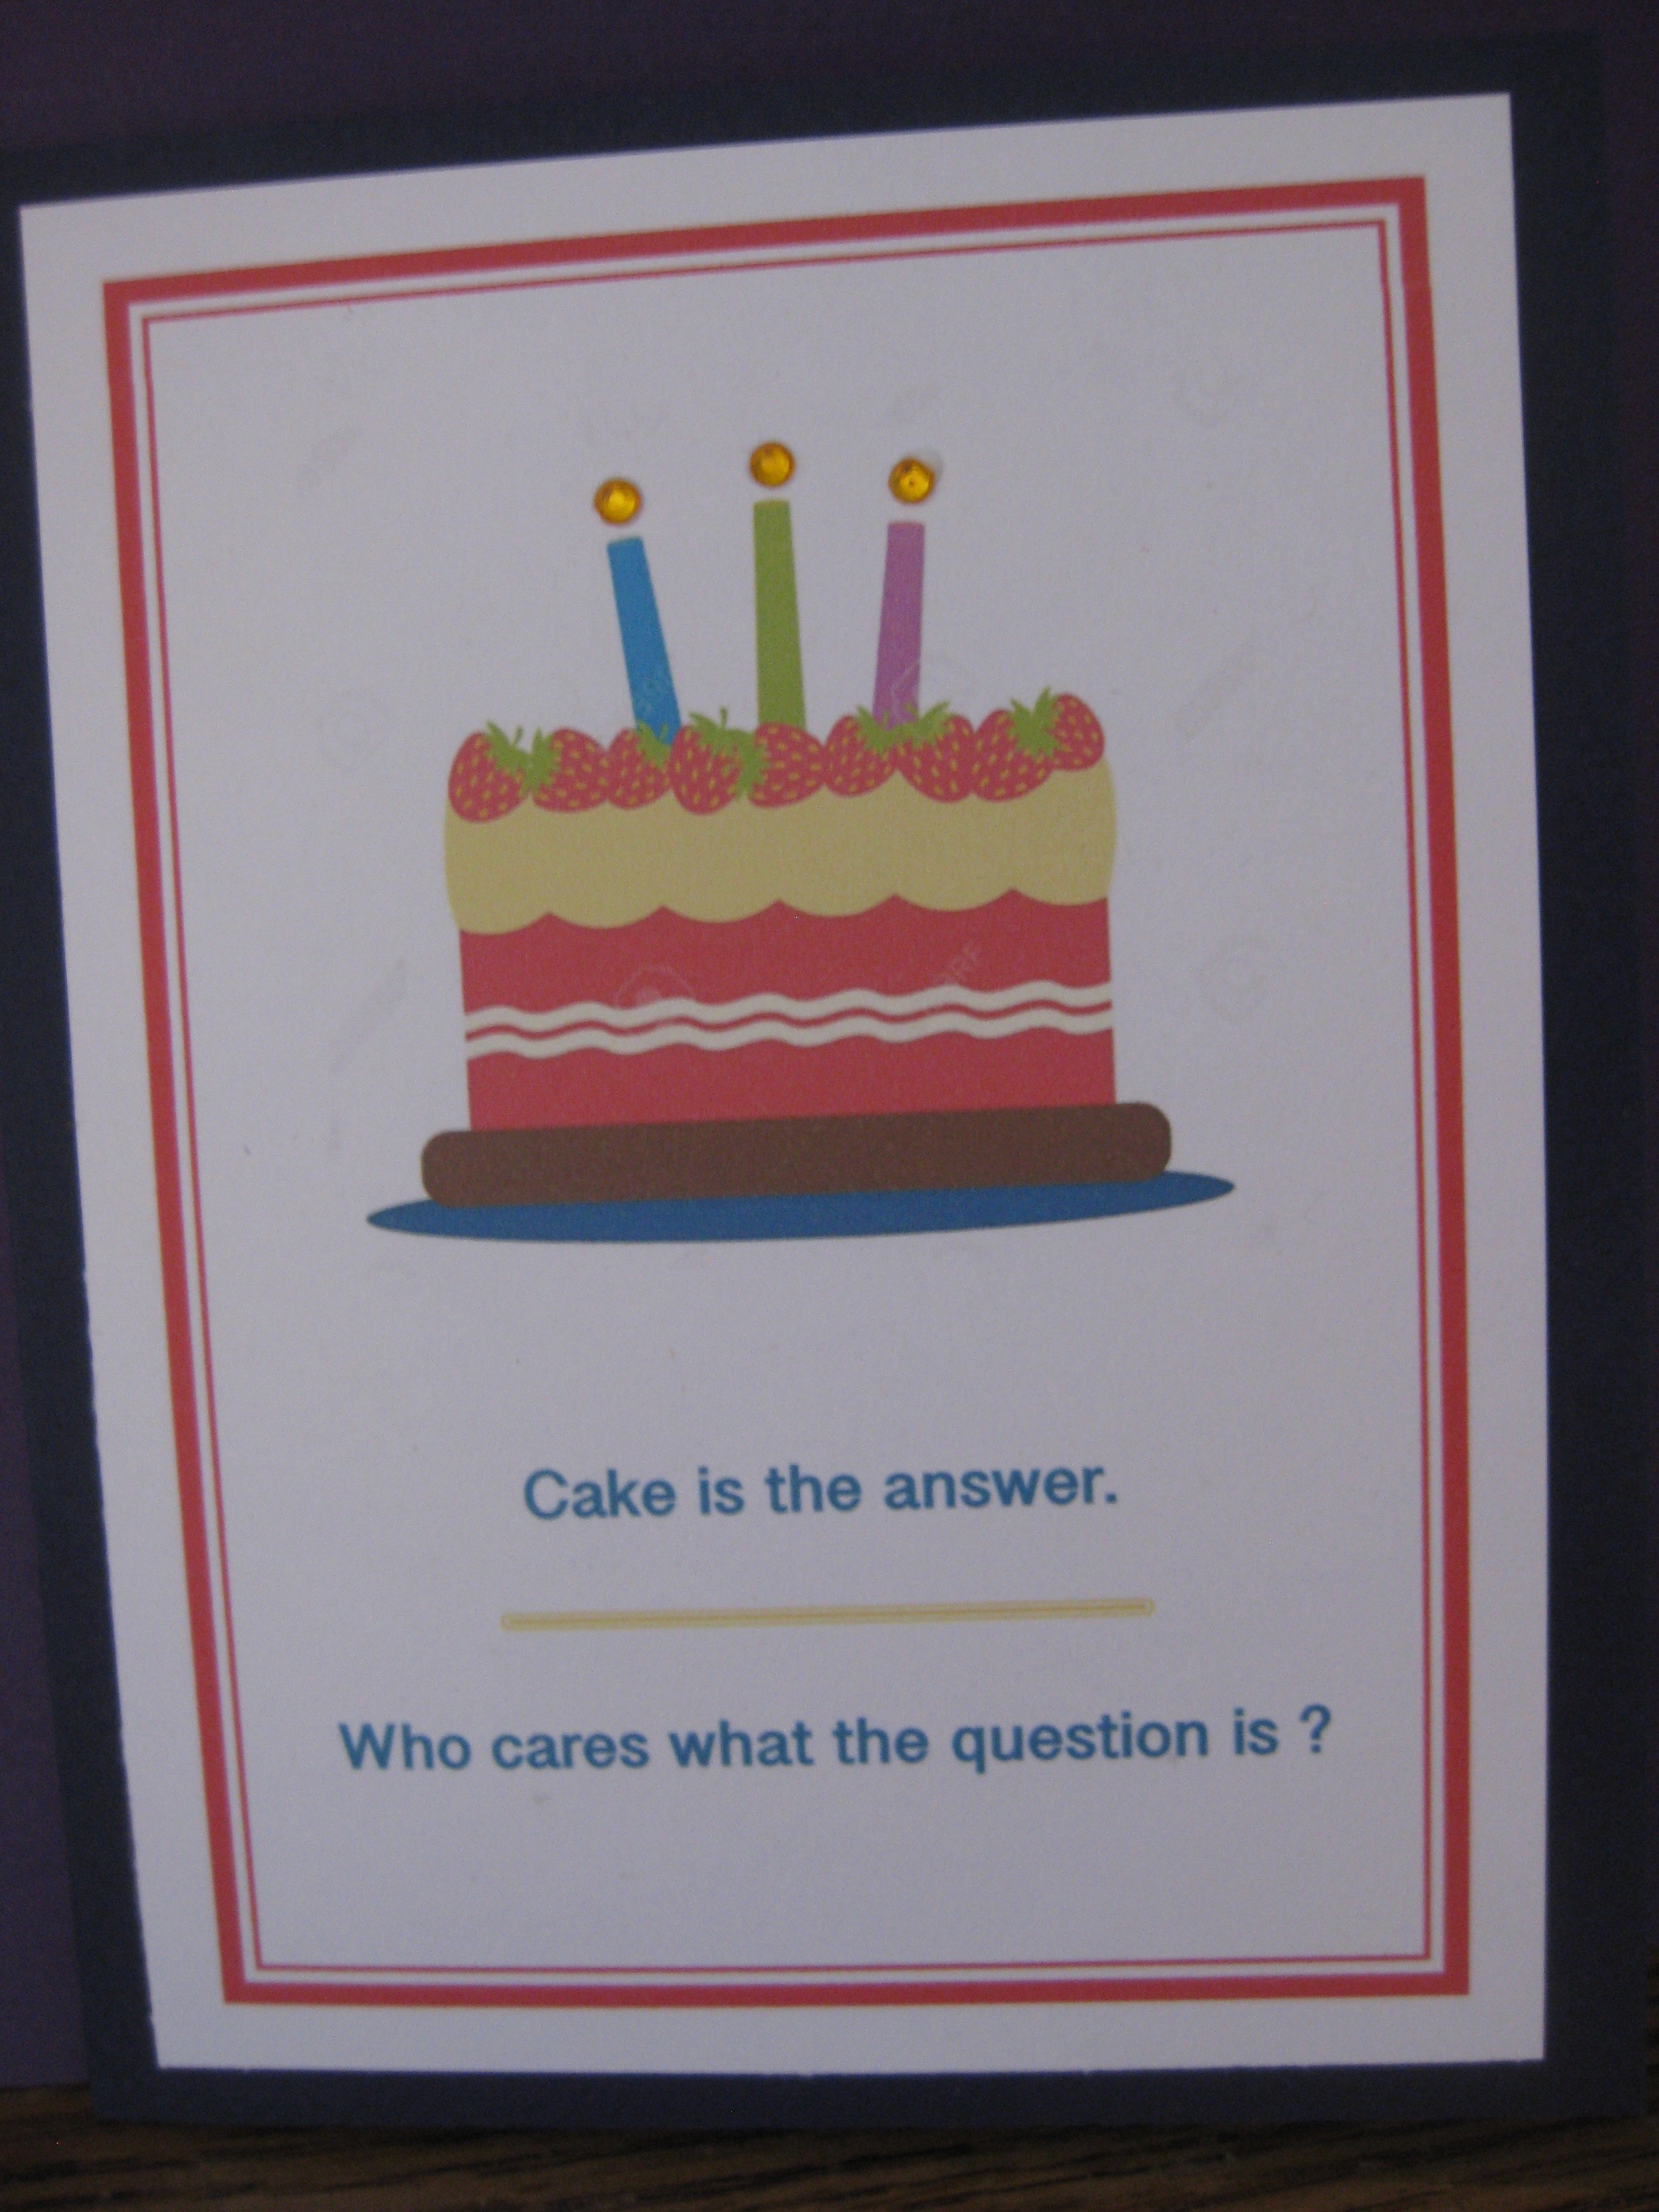 Cake is the answer